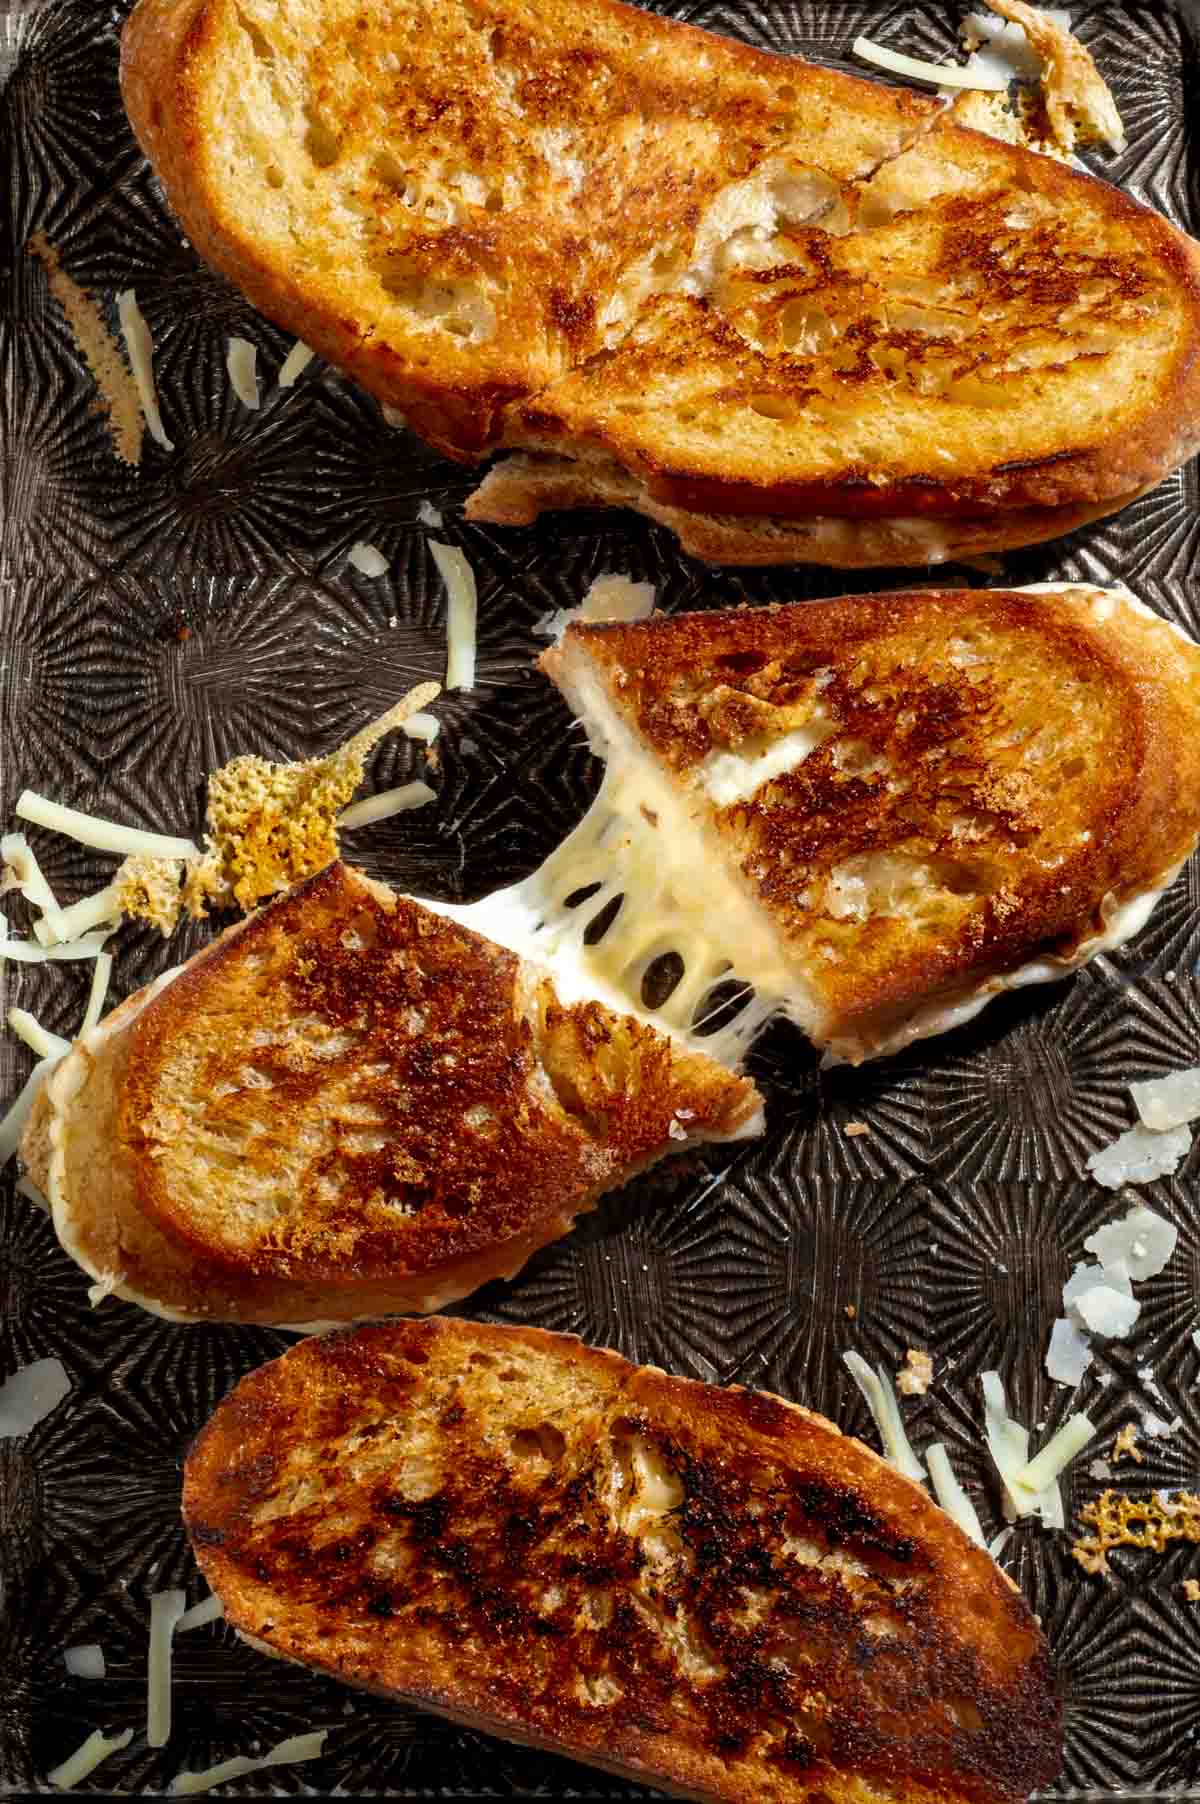 Sourdough grilled cheese sandwich sliced and pulled apart to show melted cheese inside.